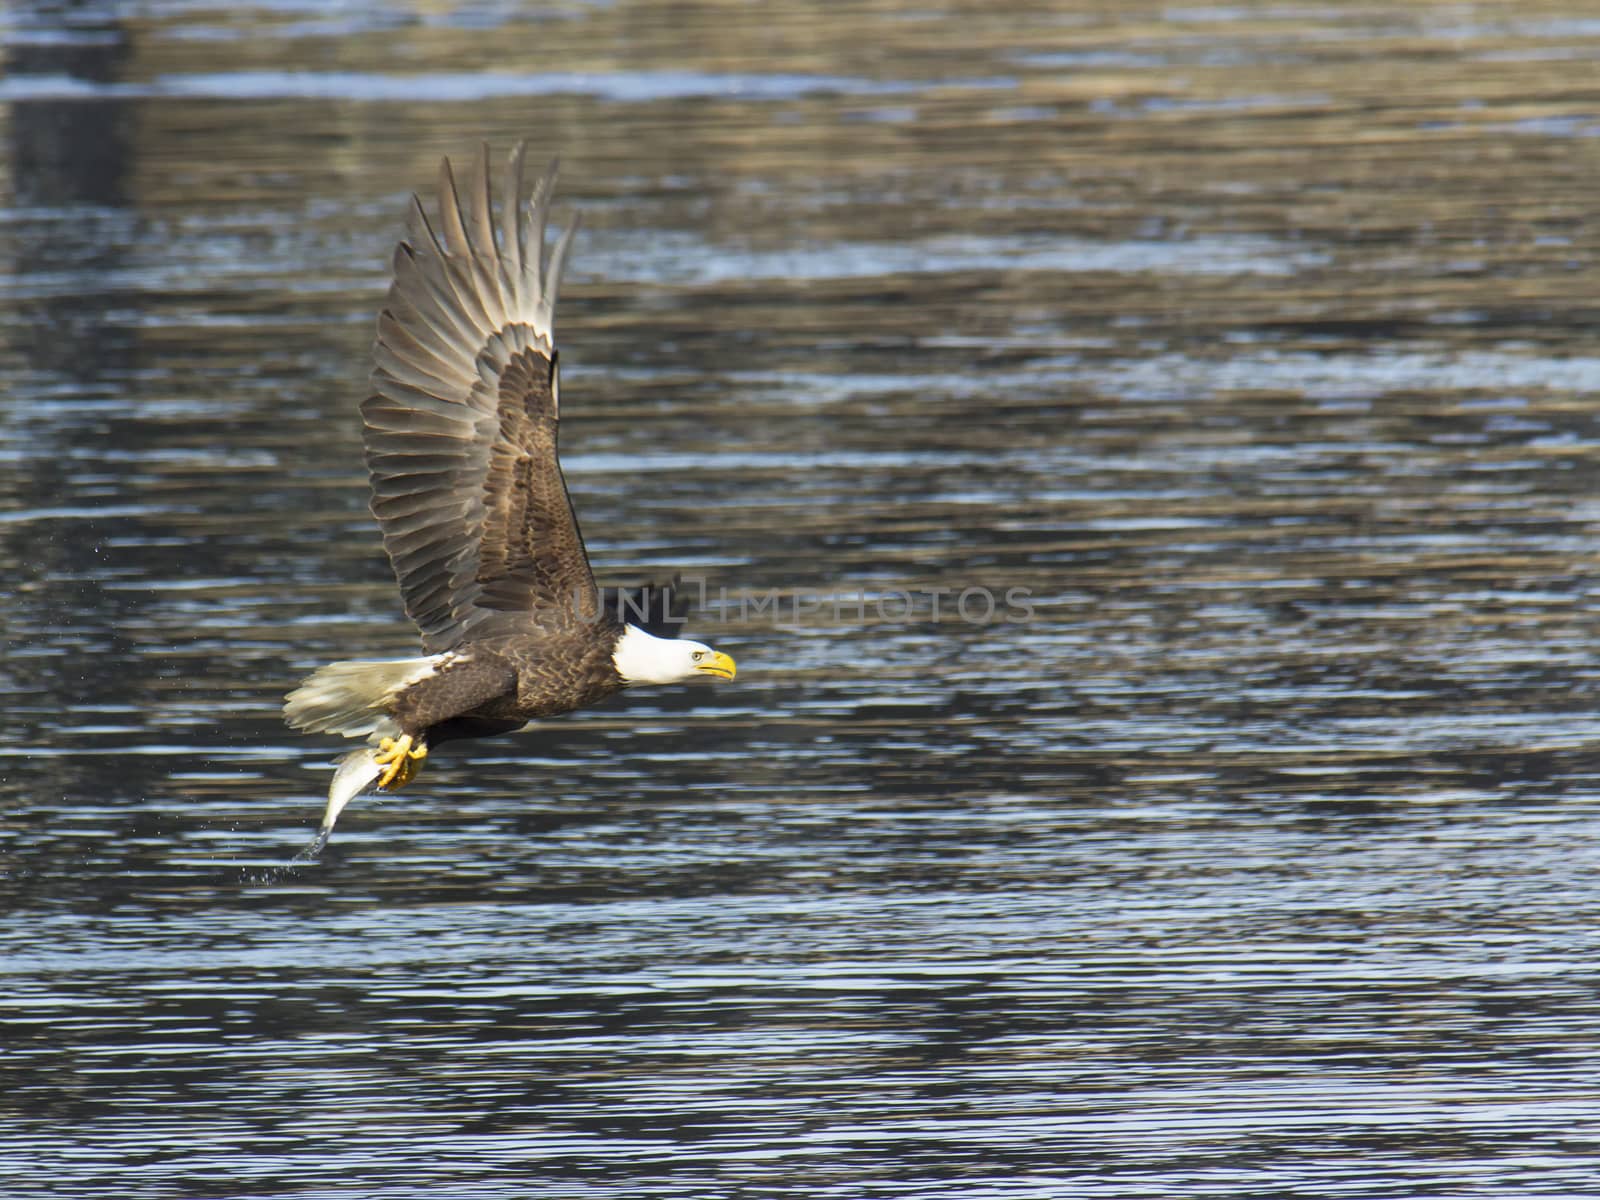 Adult bald eagle with fish by CharlieFloyd